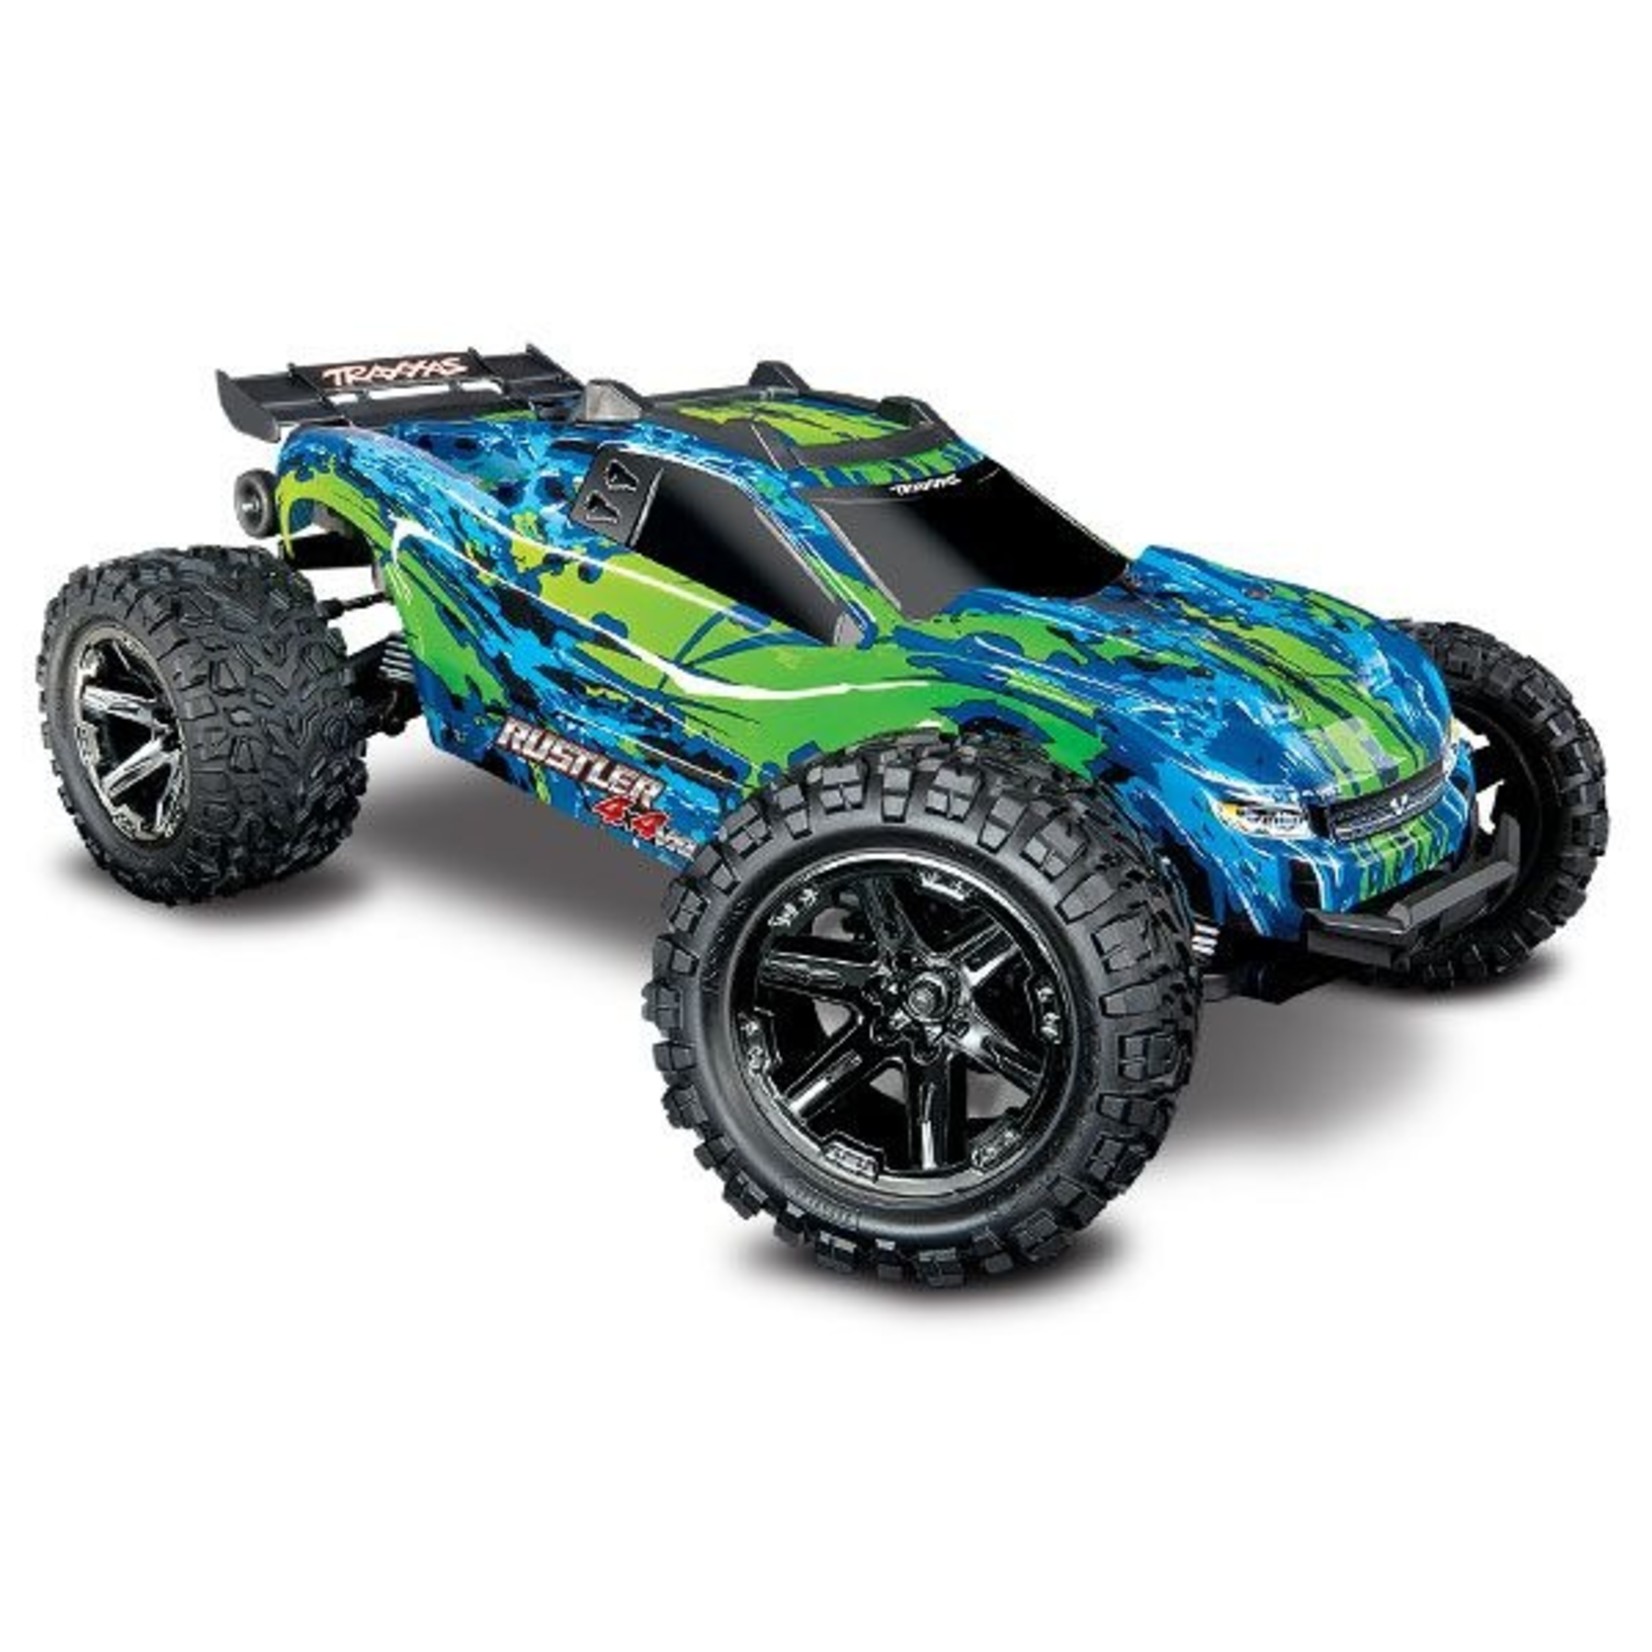 Traxxas 67076-4-GRN Rustler® 4X4 VXL:  1/10 Scale Stadium Truck with TQi™ Traxxas Link™ Enabled 2.4GHz Radio System & Traxxas Stability Management (TSM)®